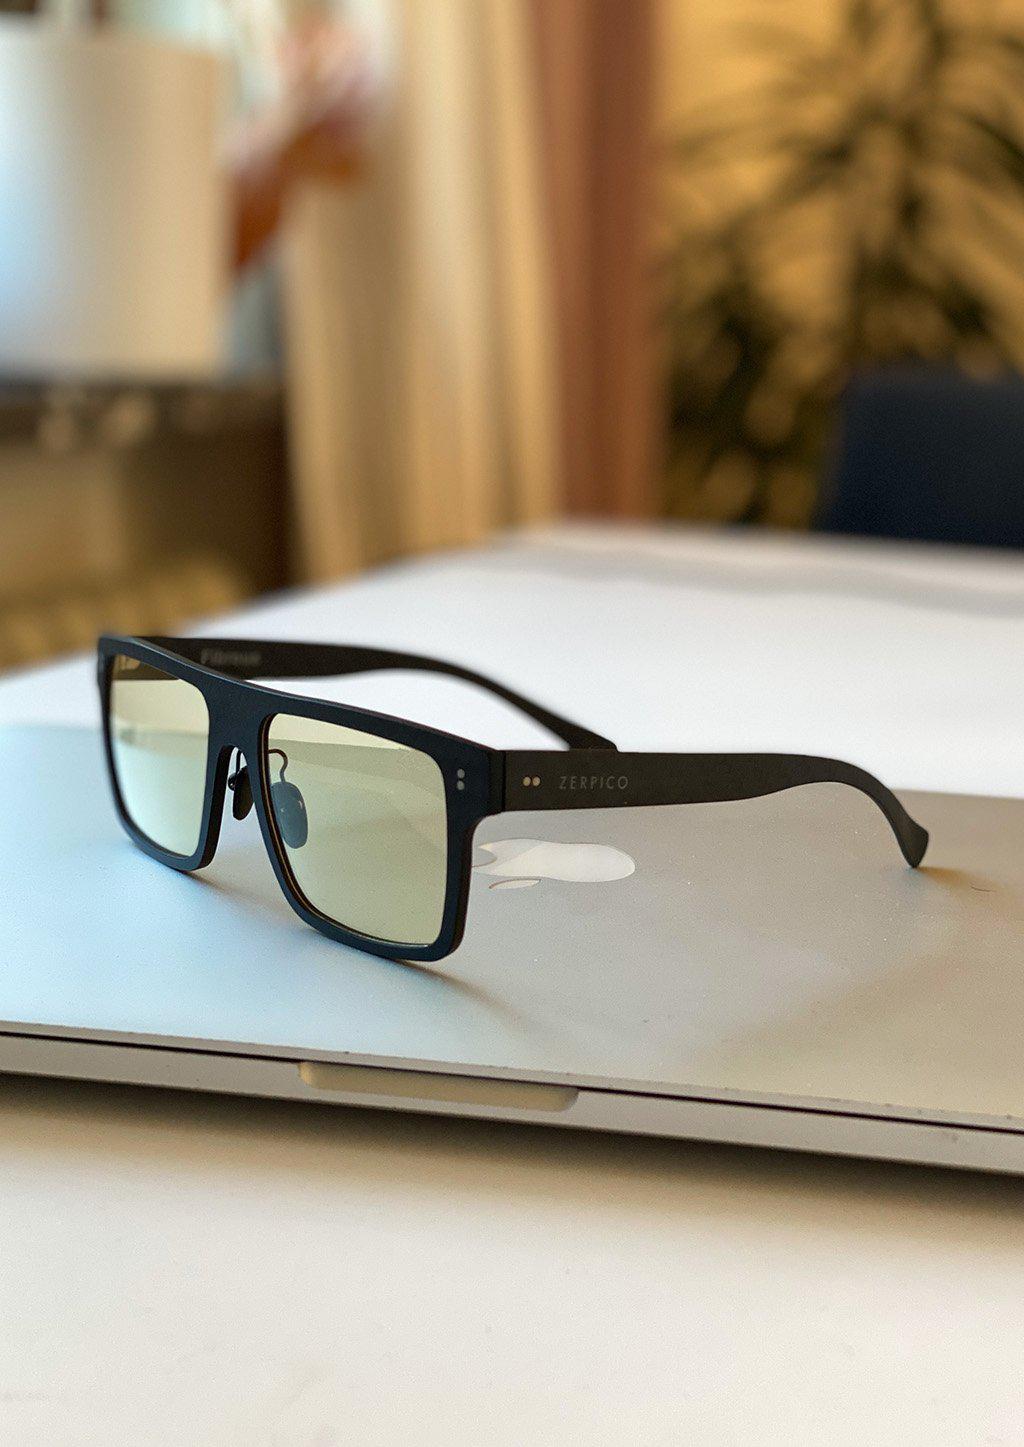 Our Anti Blue Light Square version of our Fibrous Carbon Fiber glasses. Perfect for gamers. Also turns dark outside. The perfect glasses for working infront of the computer.